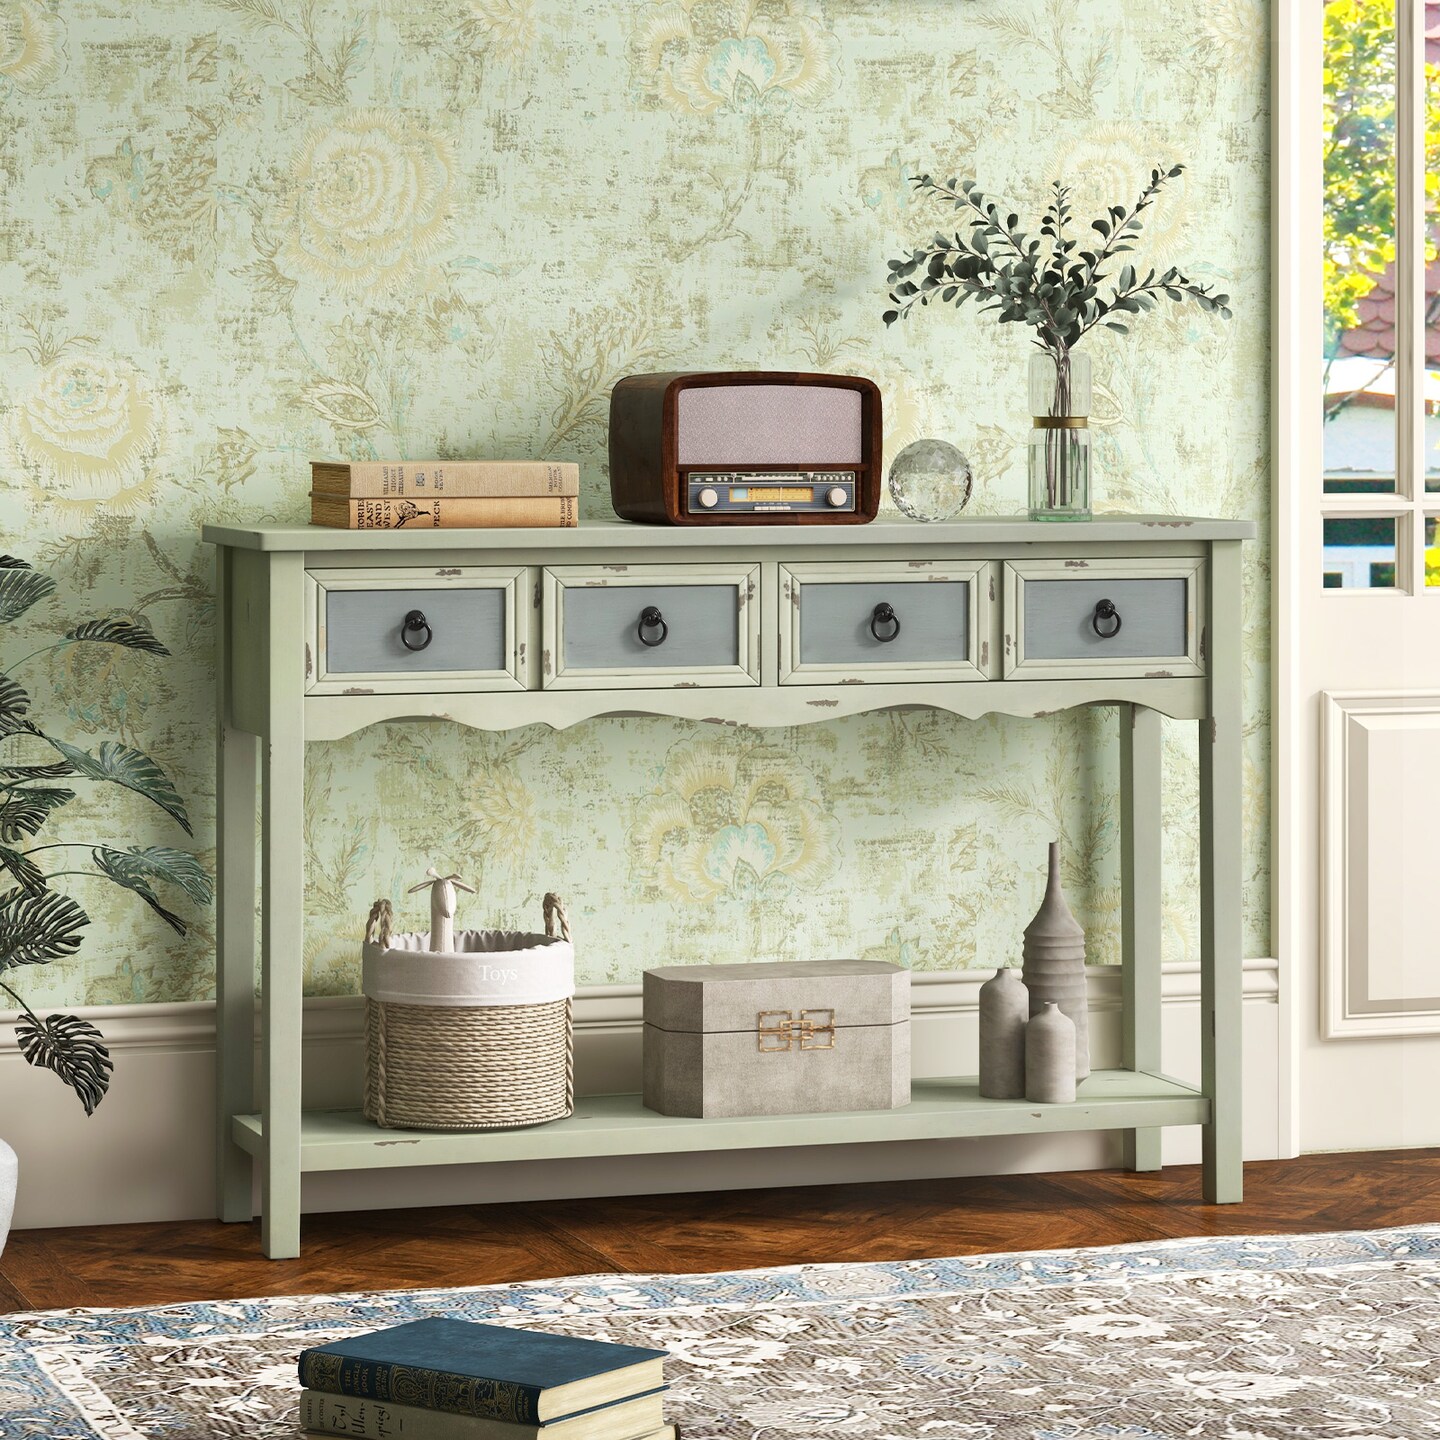 48 Inch Farmhouse Console Table With 2 Drawers And Open Storage Shelf For Hallway